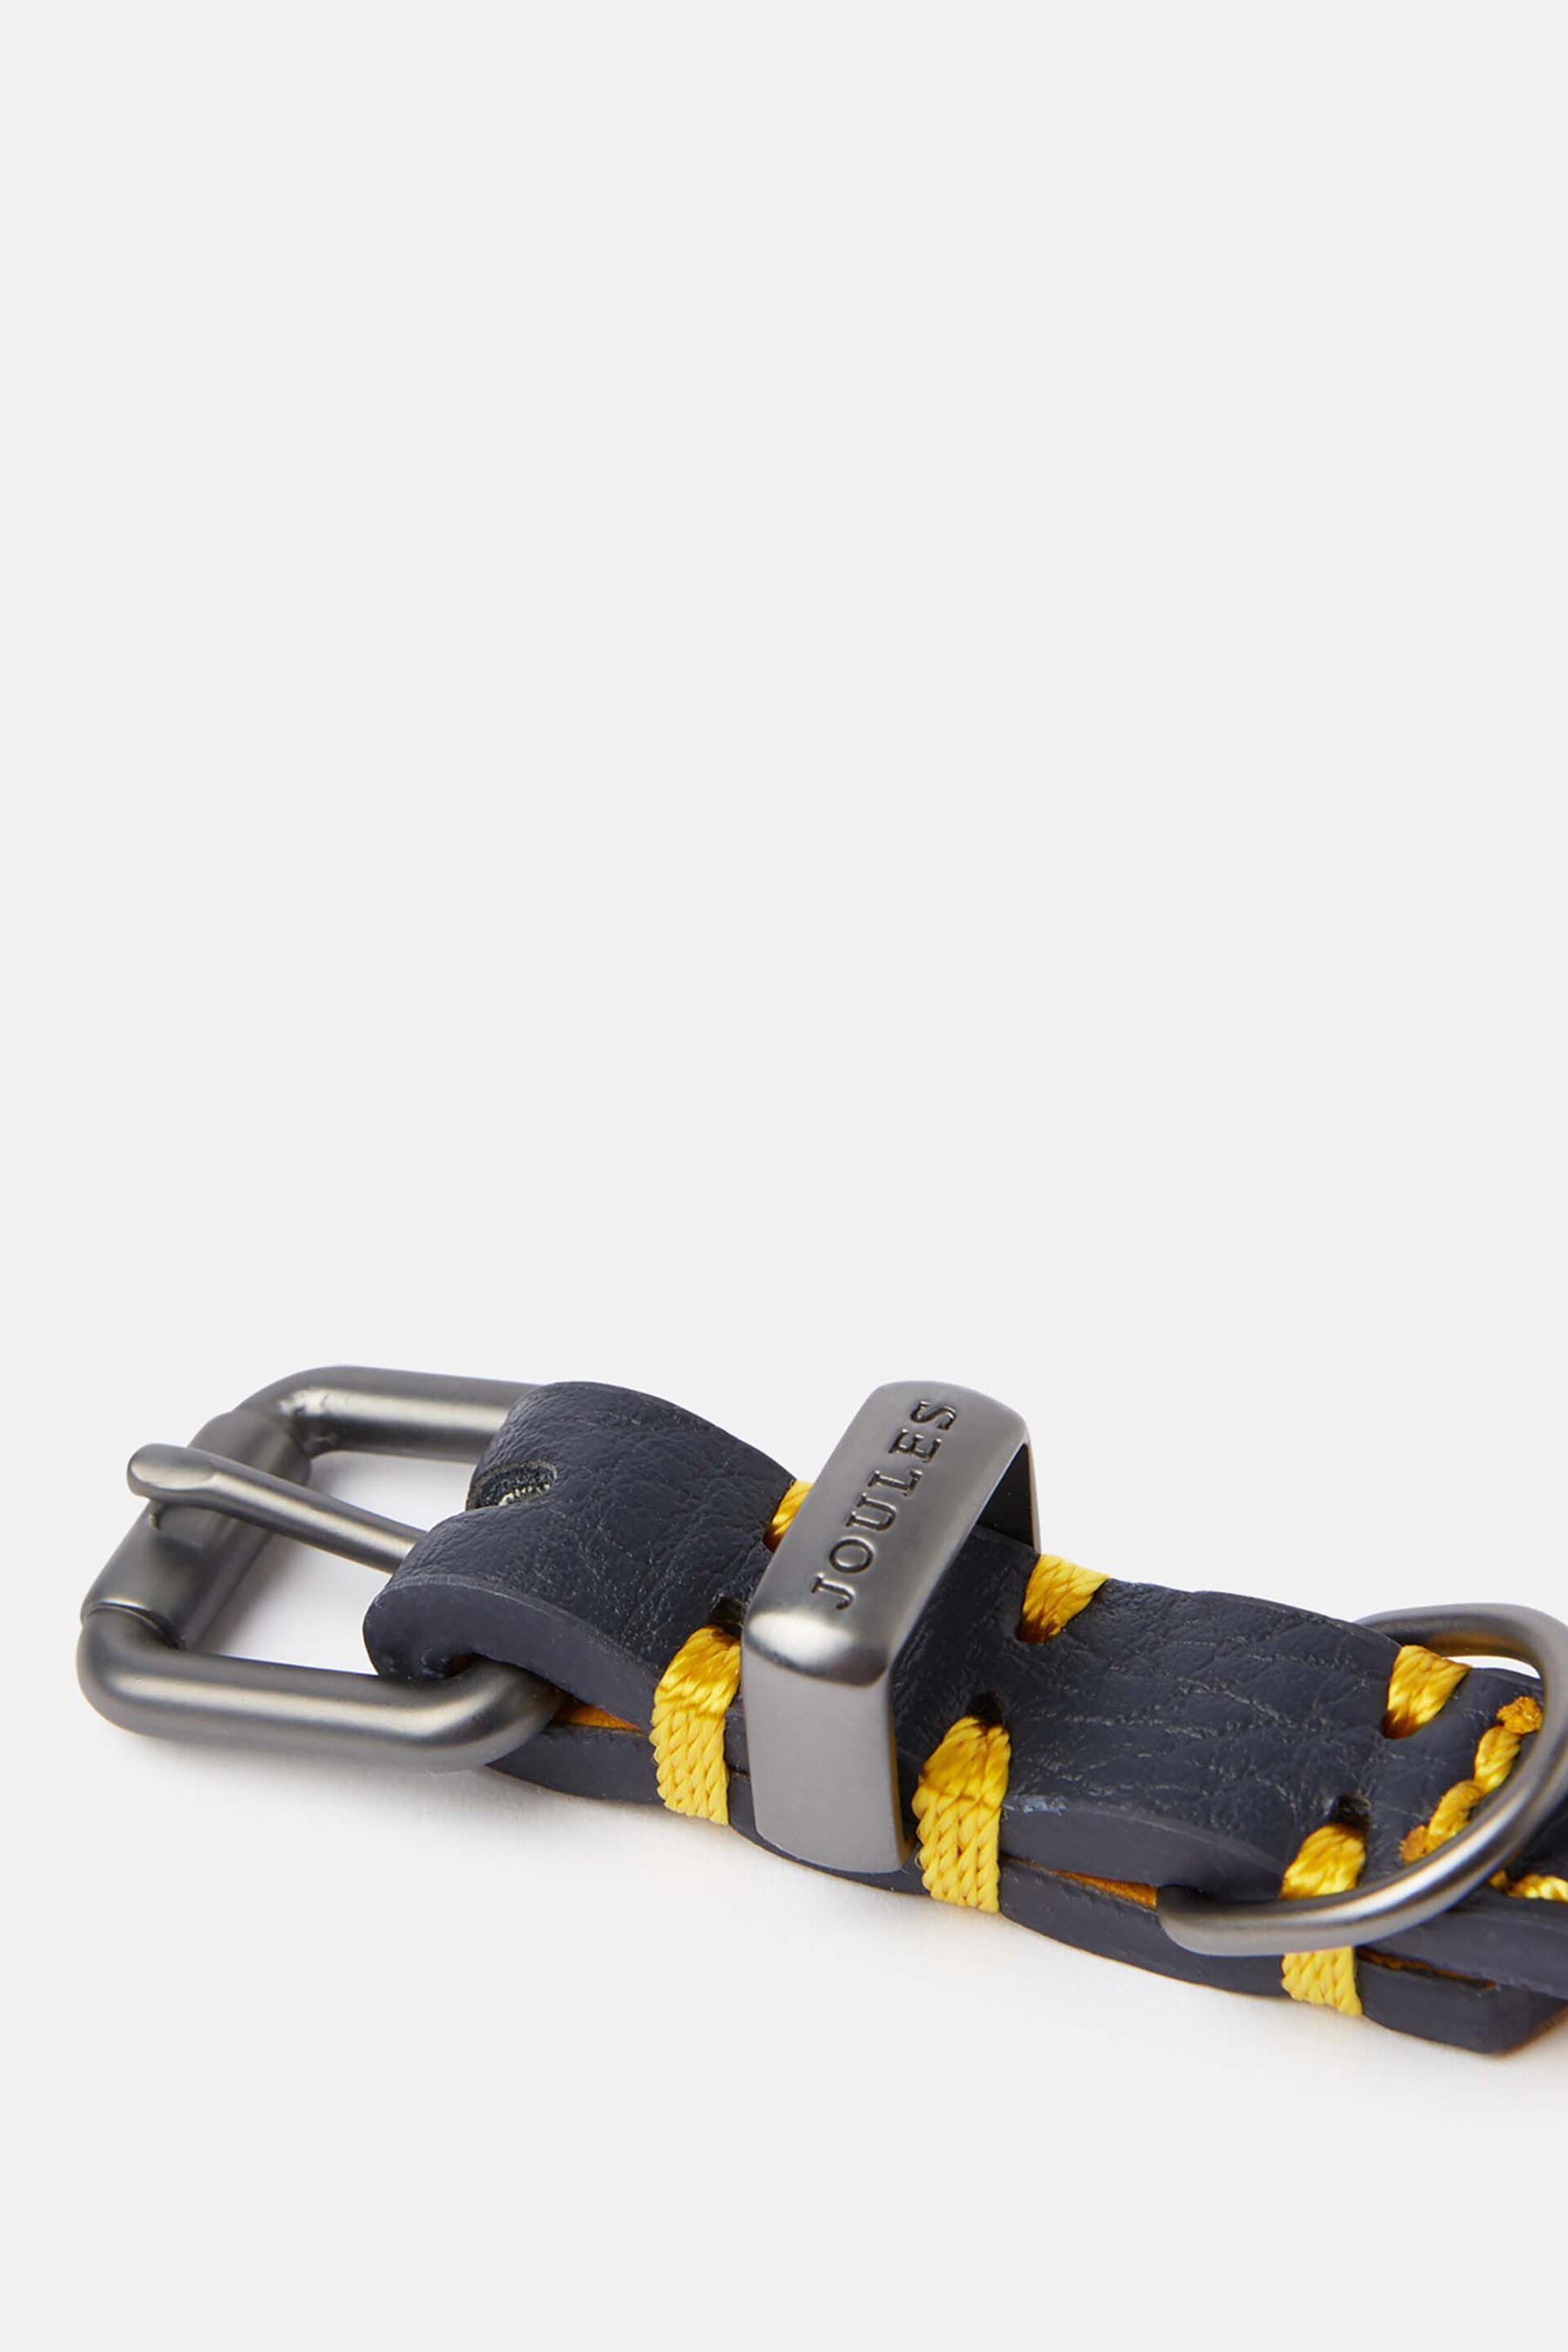 Joules Blue Adjustable Leather Dog Collar - Image 4 of 4